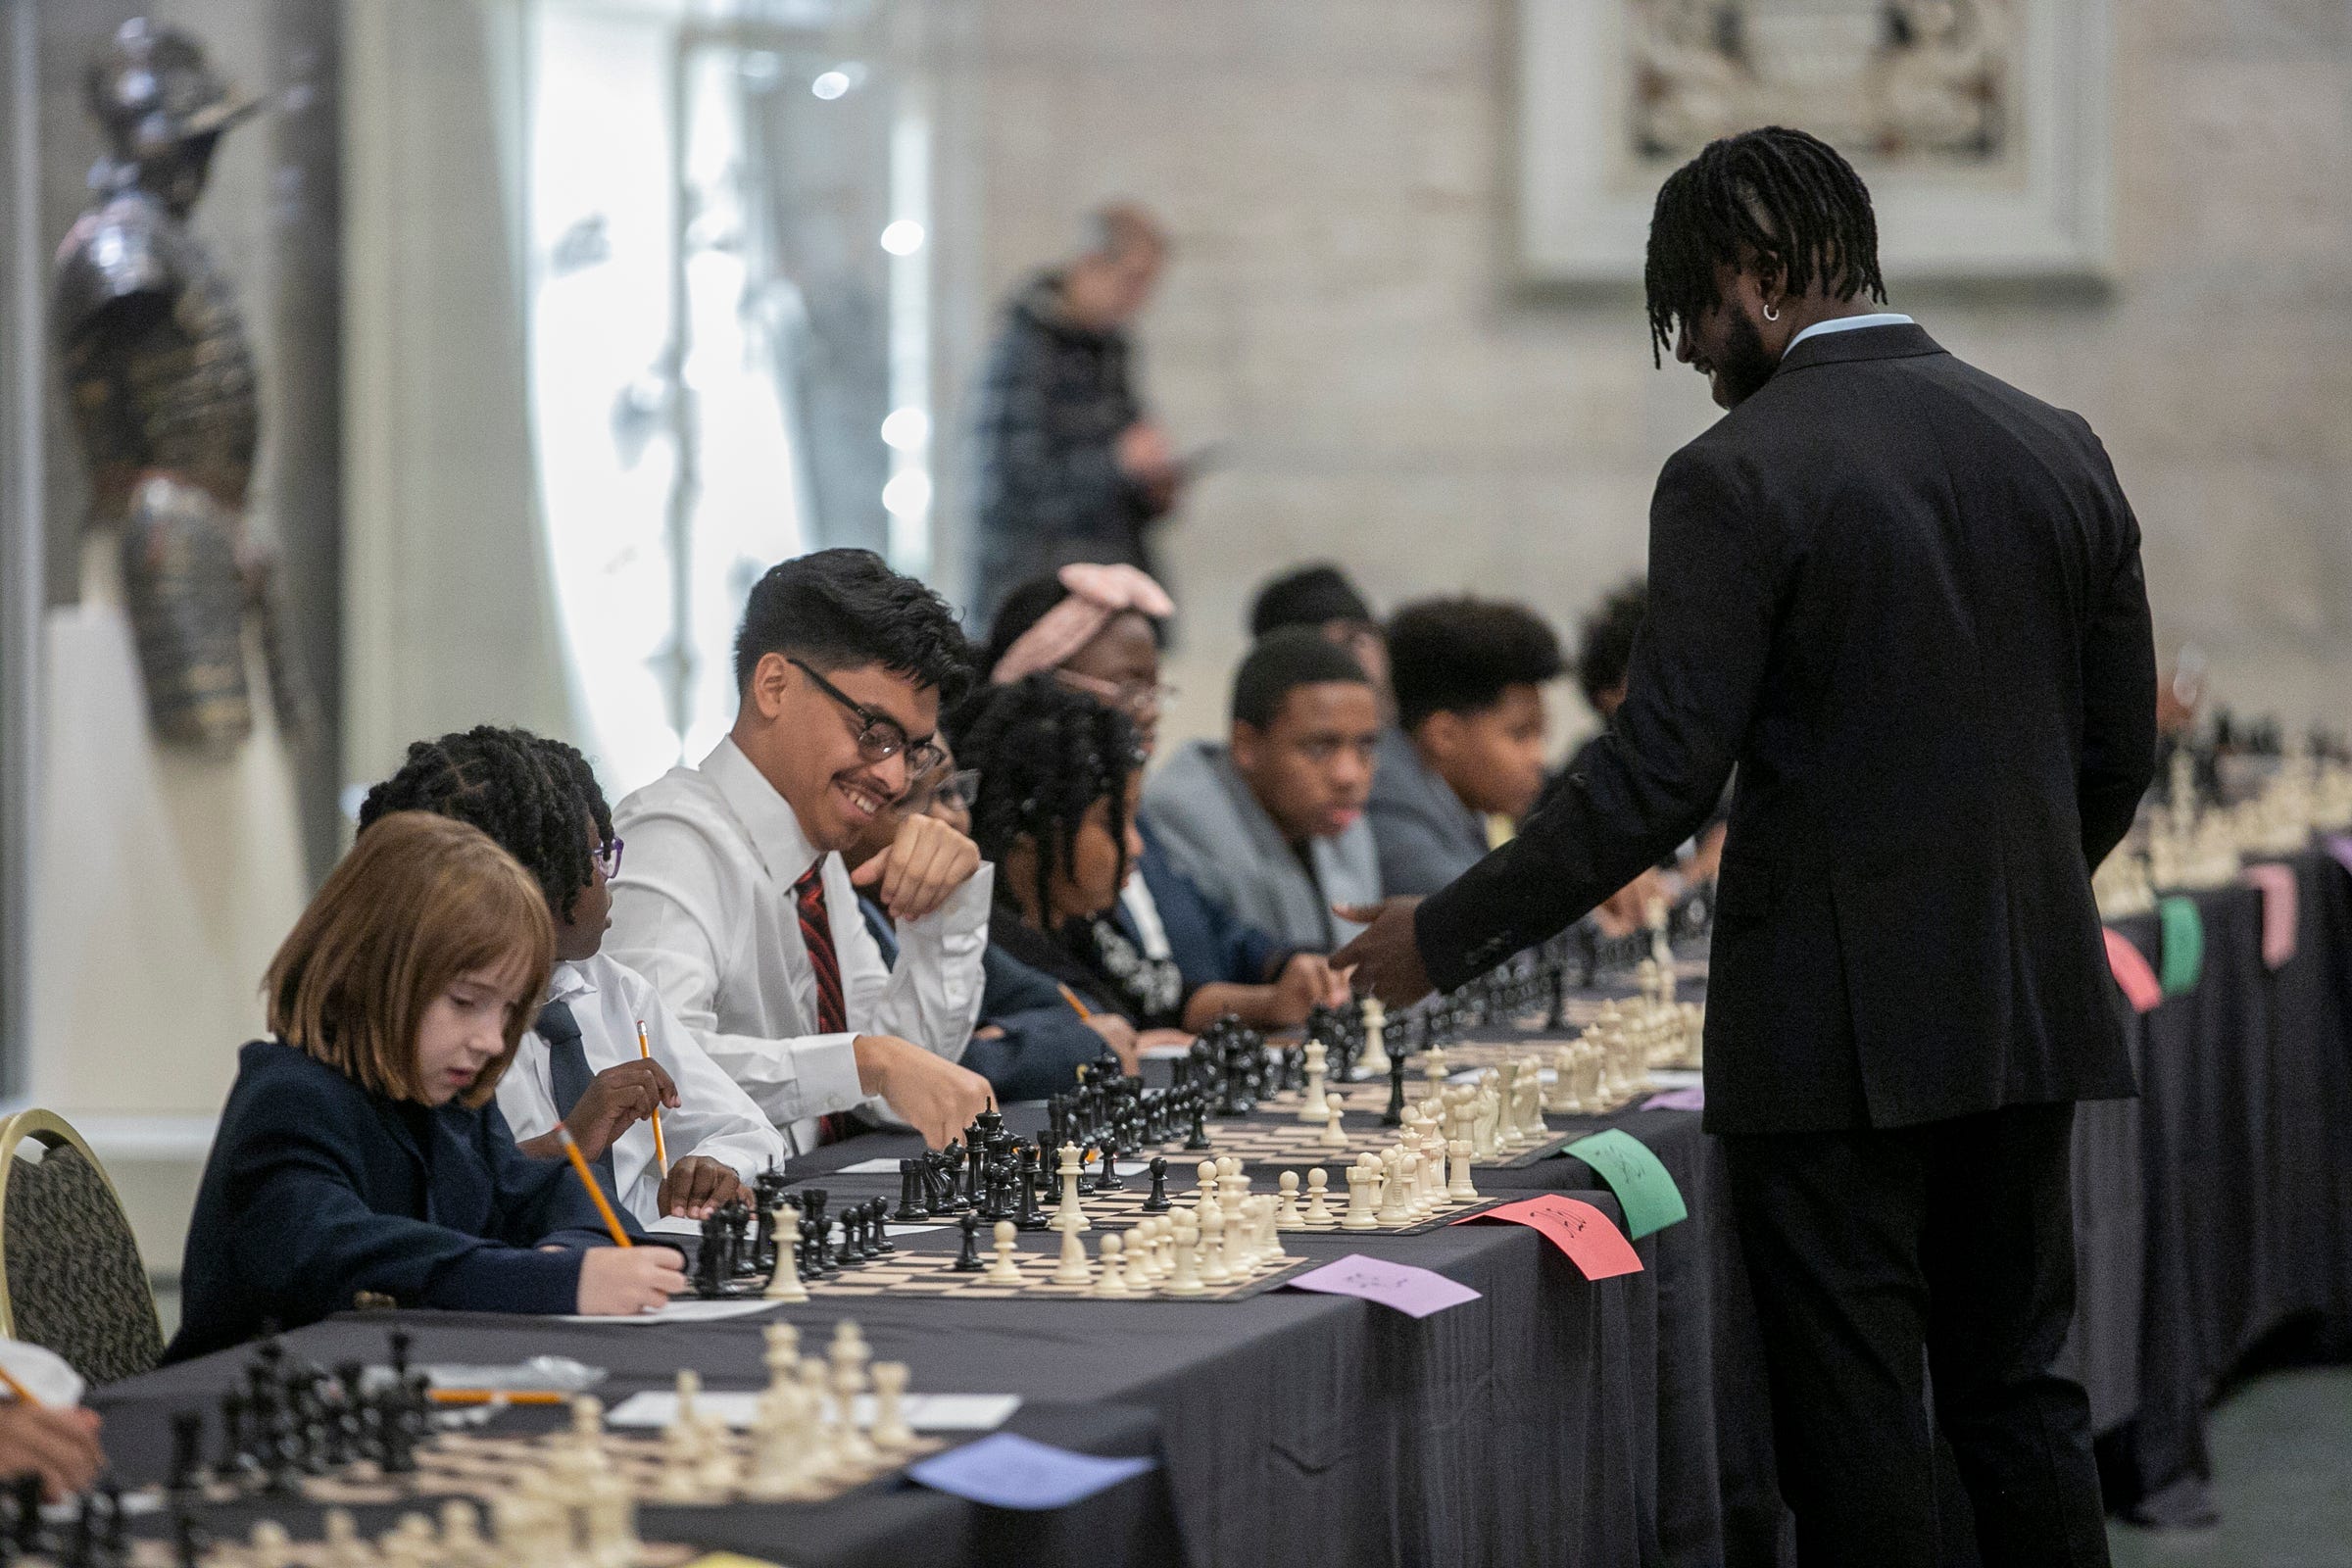 Chess player makes history in global contest – THE MERCURY